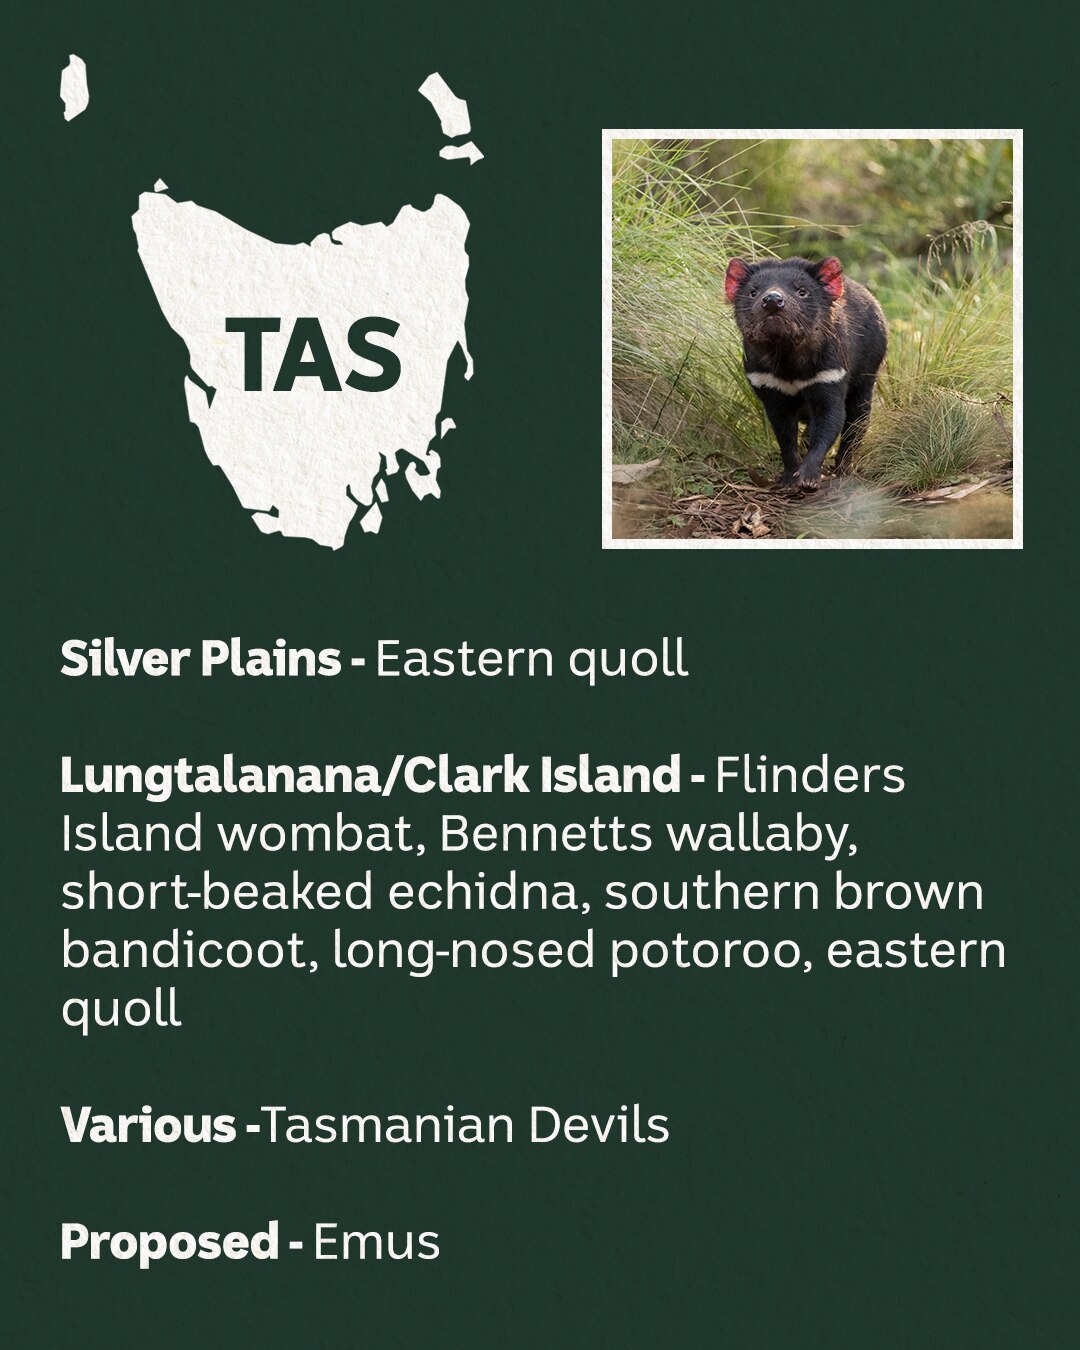 A white map of Tasmania with a picture of a marsupial.